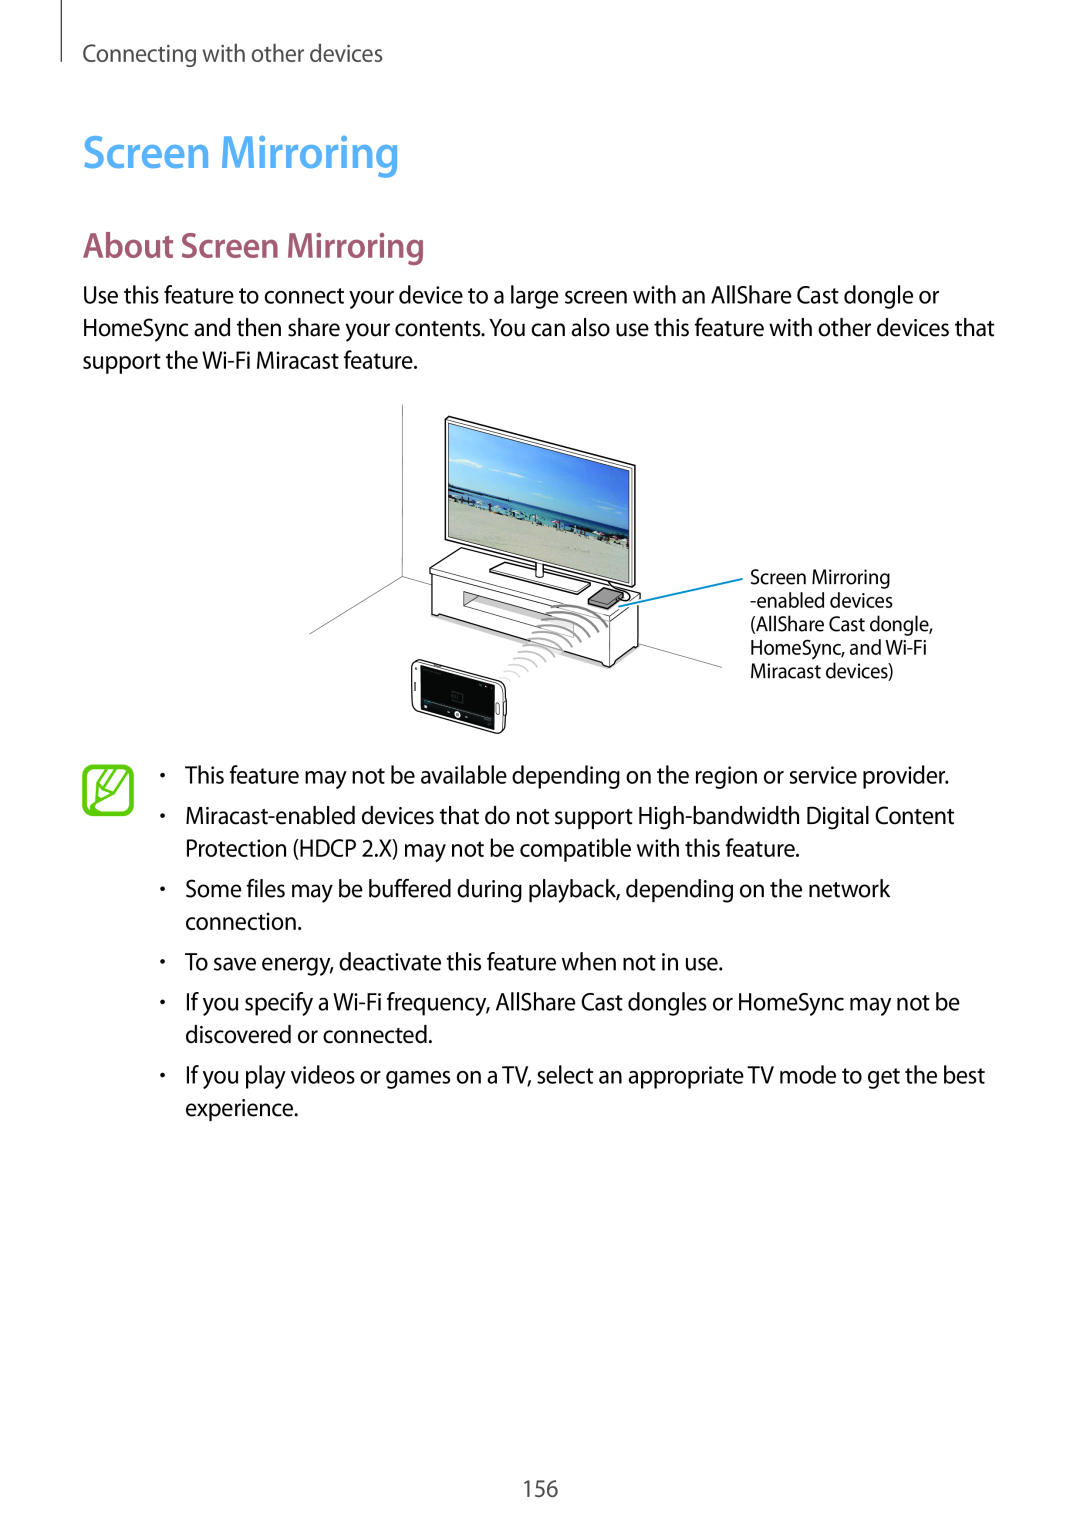 Samsung SM-G901FZWABOG, SM-G901FZKACOS, SM-G901FZDABAL manual About Screen Mirroring, Connecting with other devices 